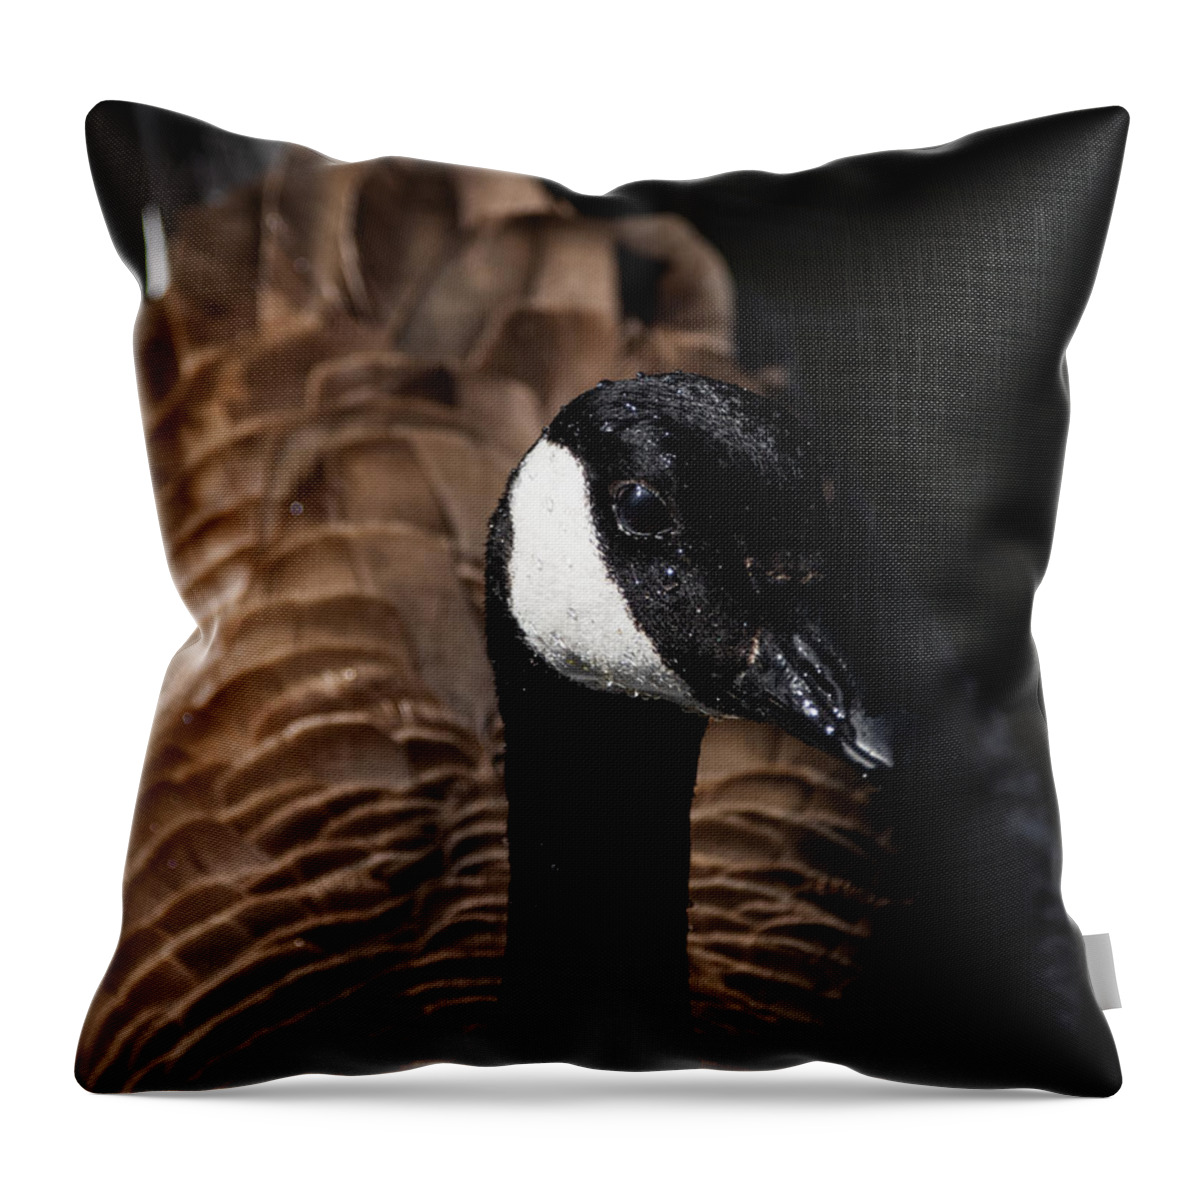 Wildlife Throw Pillow featuring the photograph In My Space by Linda Bonaccorsi